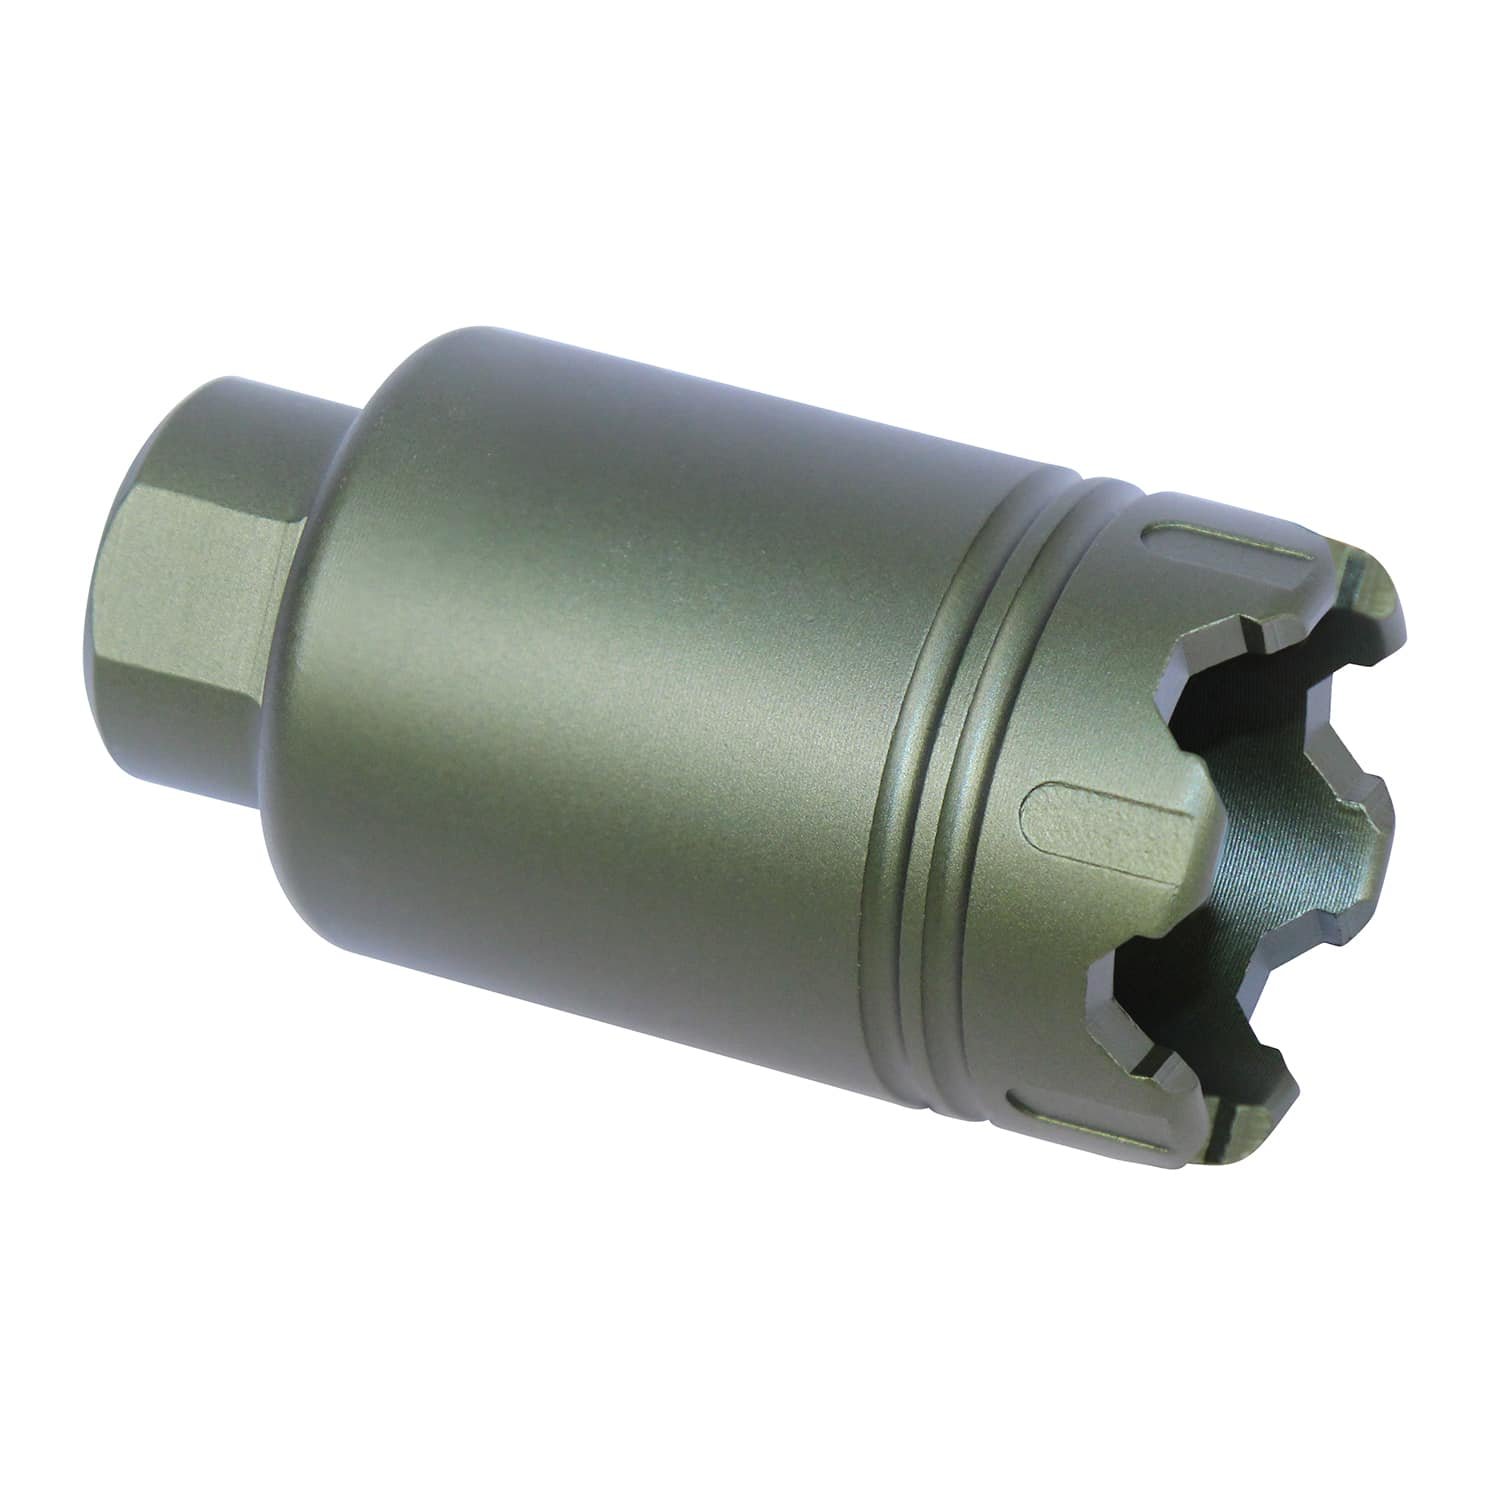 AR-15 Micro 'Trident' Flash Can With Glass Breaker (Anodized Green)